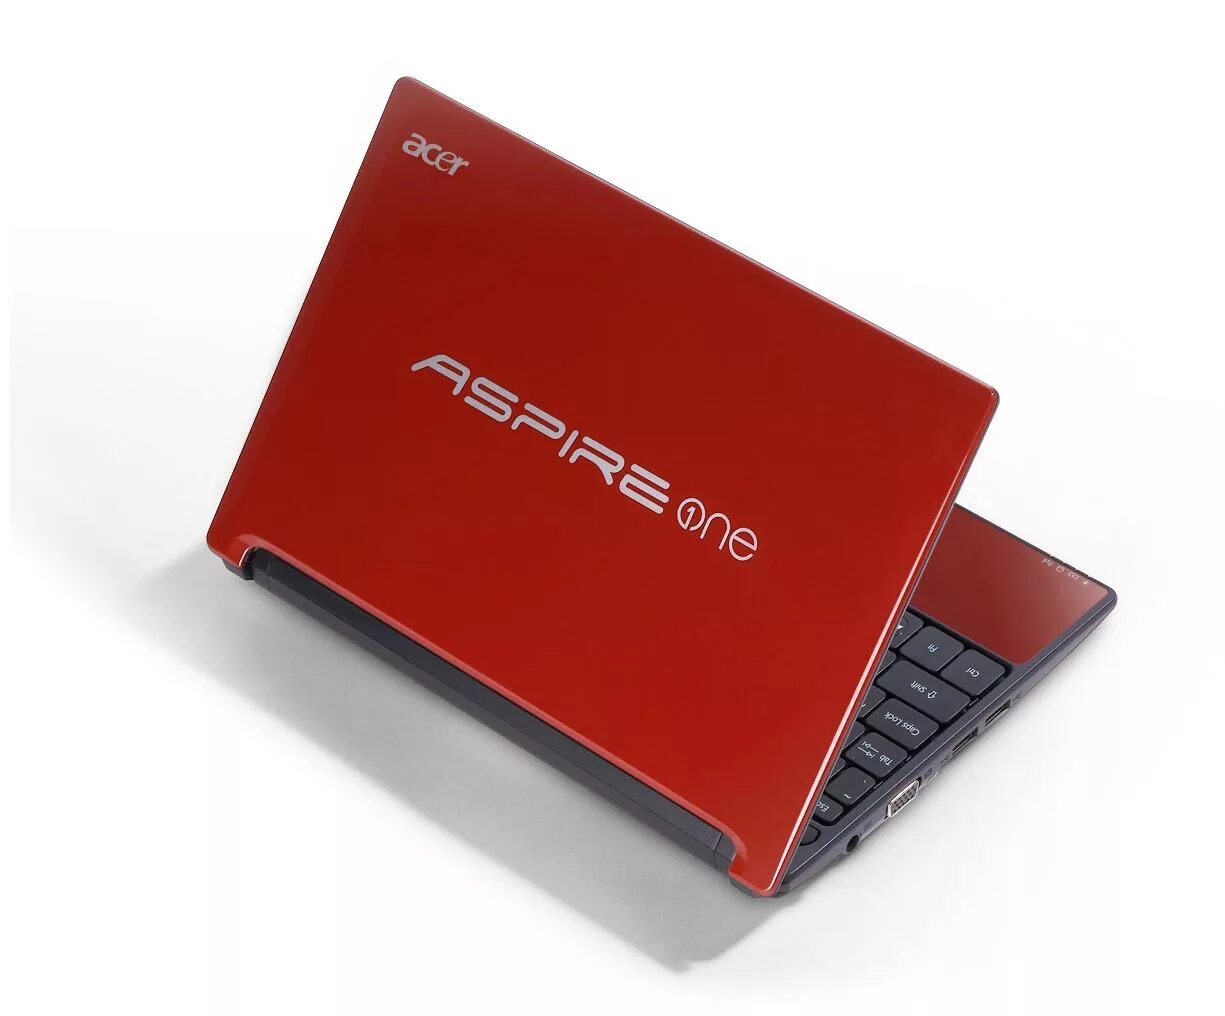 Acer one d255. Нетбук Acer Aspire one 255. Acer Aspire one d255.